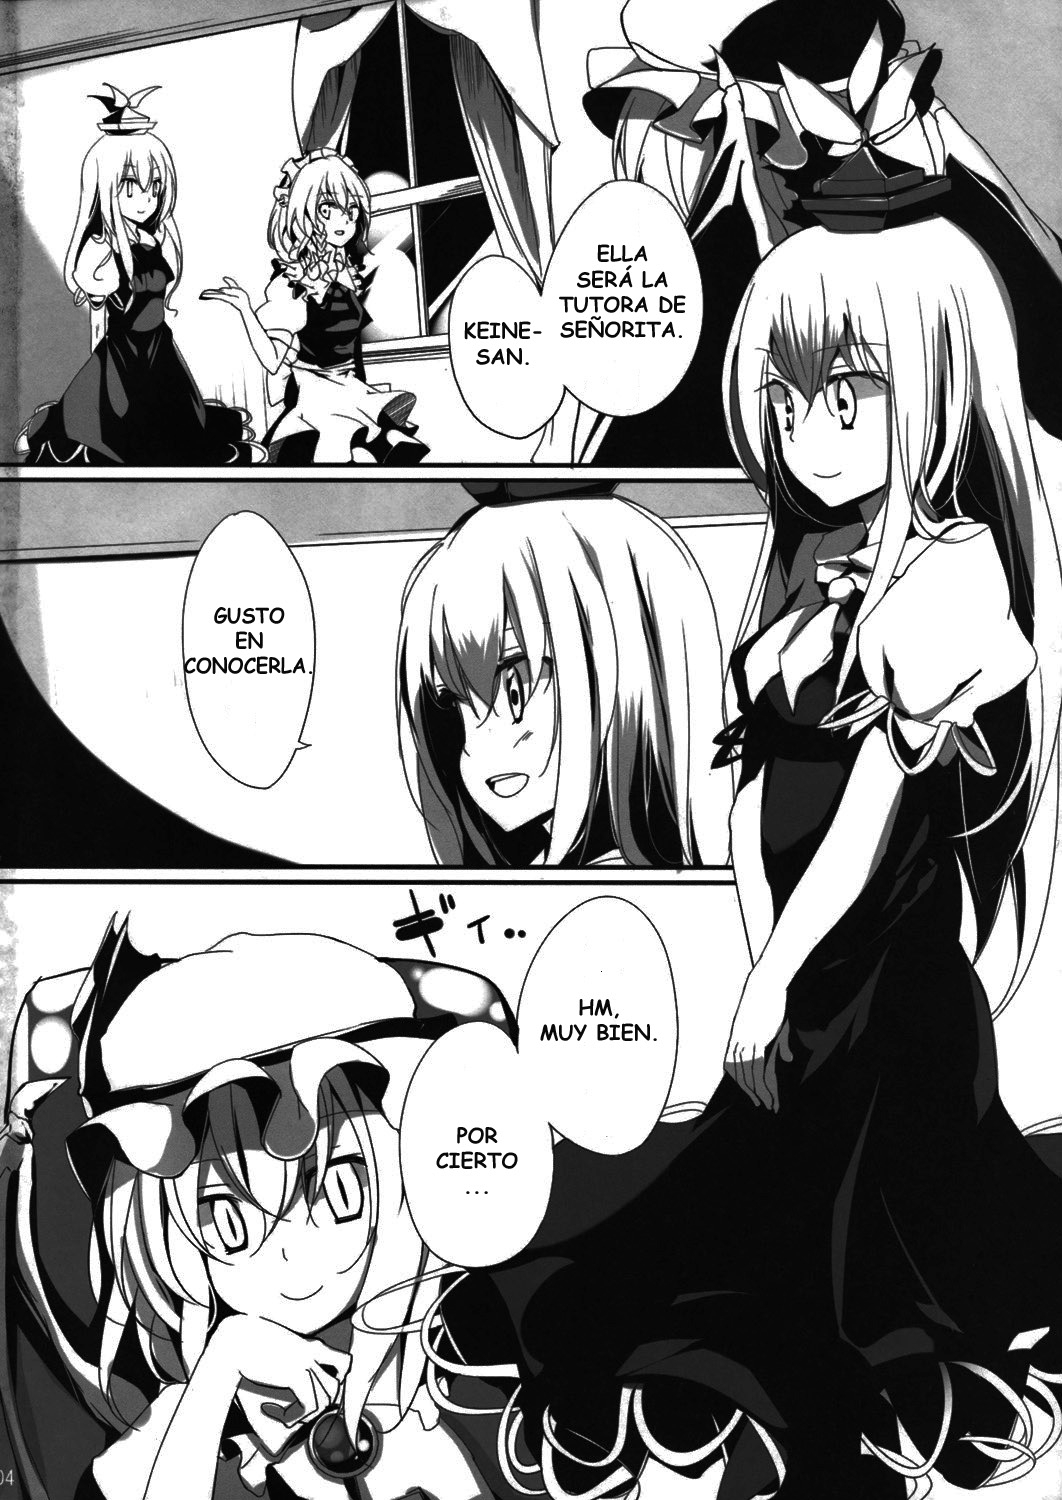 (C76) [Usotsukiya, Oppore-Coppore (BeLL, Oouso)] Flandre Student (Touhou Project) [Spanish] 3